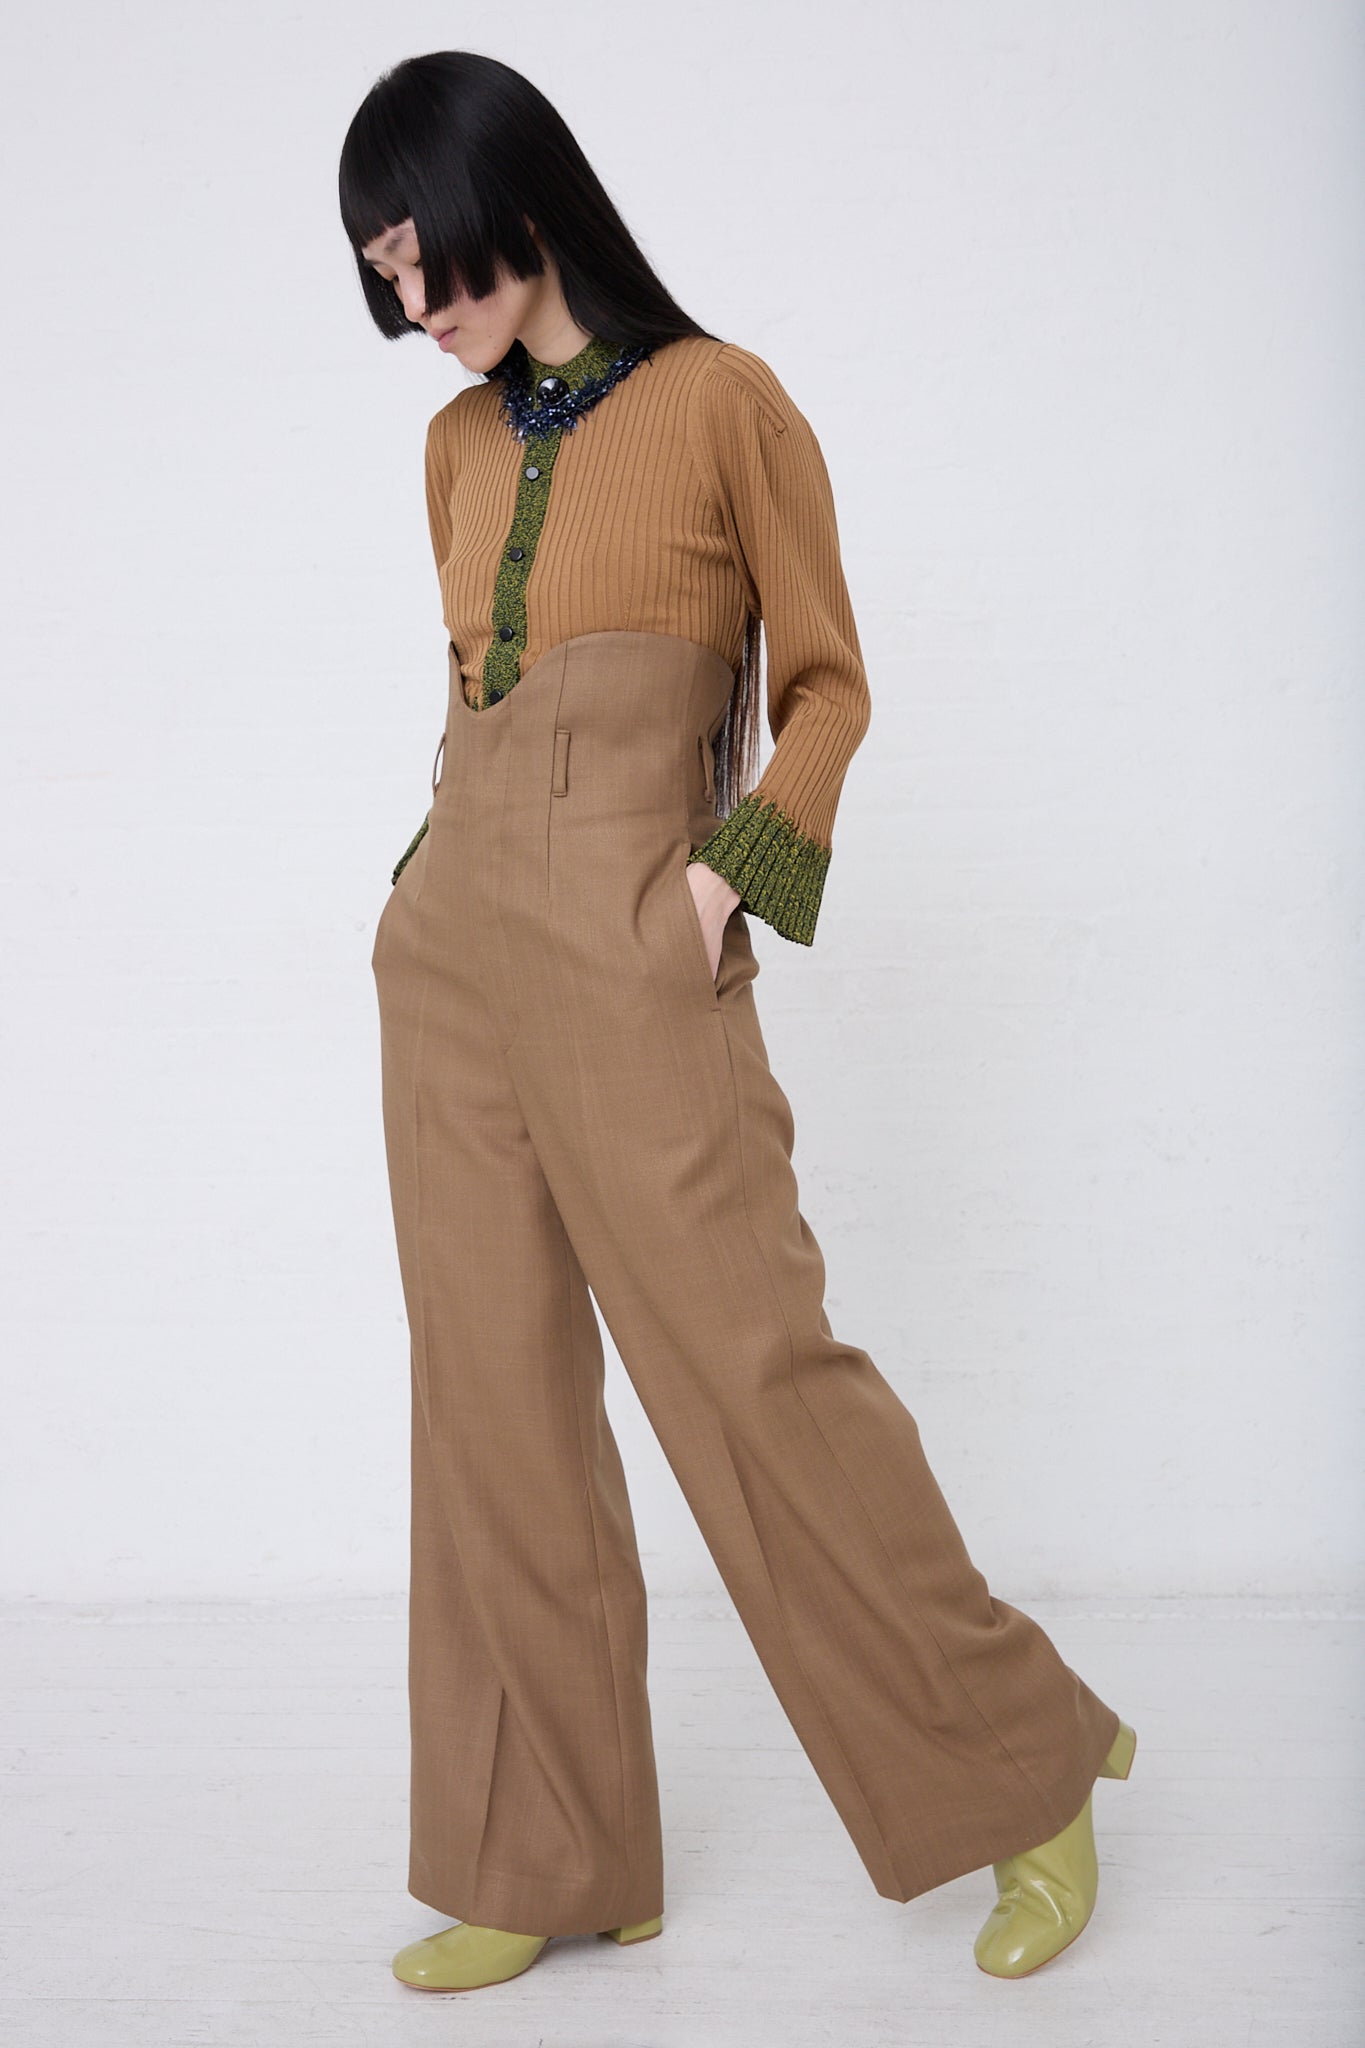 A woman in a stylish TOGA ARCHIVES brown pantsuit with a ribbed top and high waist trousers, paired with green gloves and yellow shoes, standing against a plain white background.